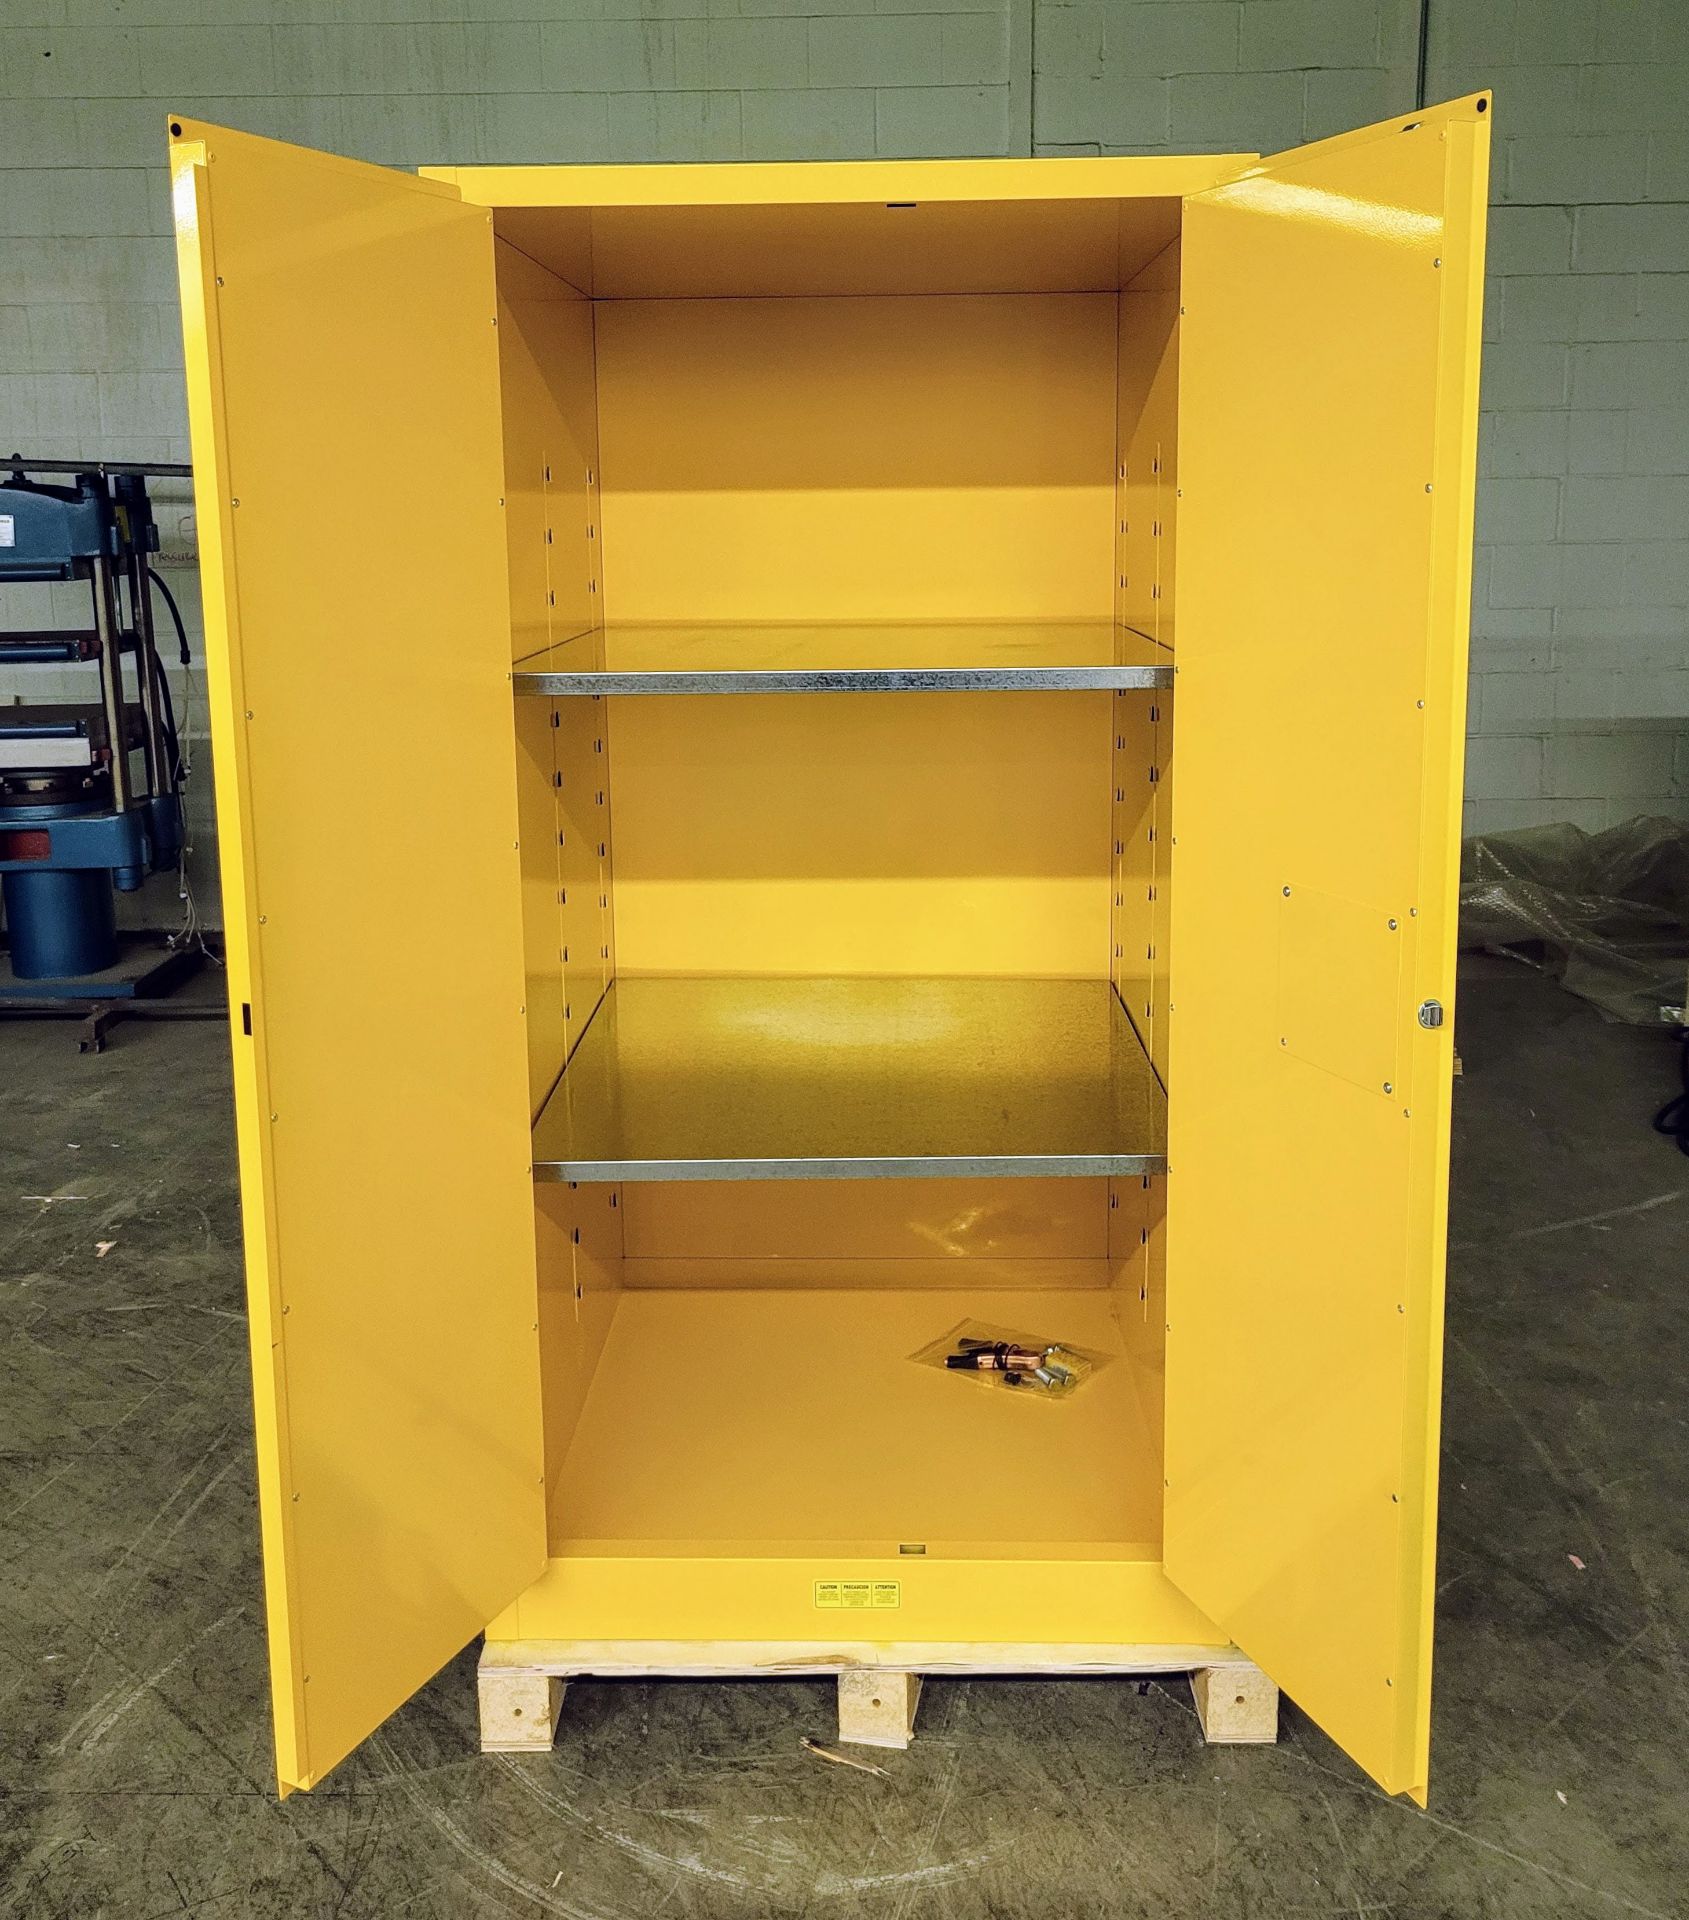 NEW FLAMMABLE TWO DOOR STORAGE CABINET - (34"L X 34"W X 65"H) - Image 3 of 3